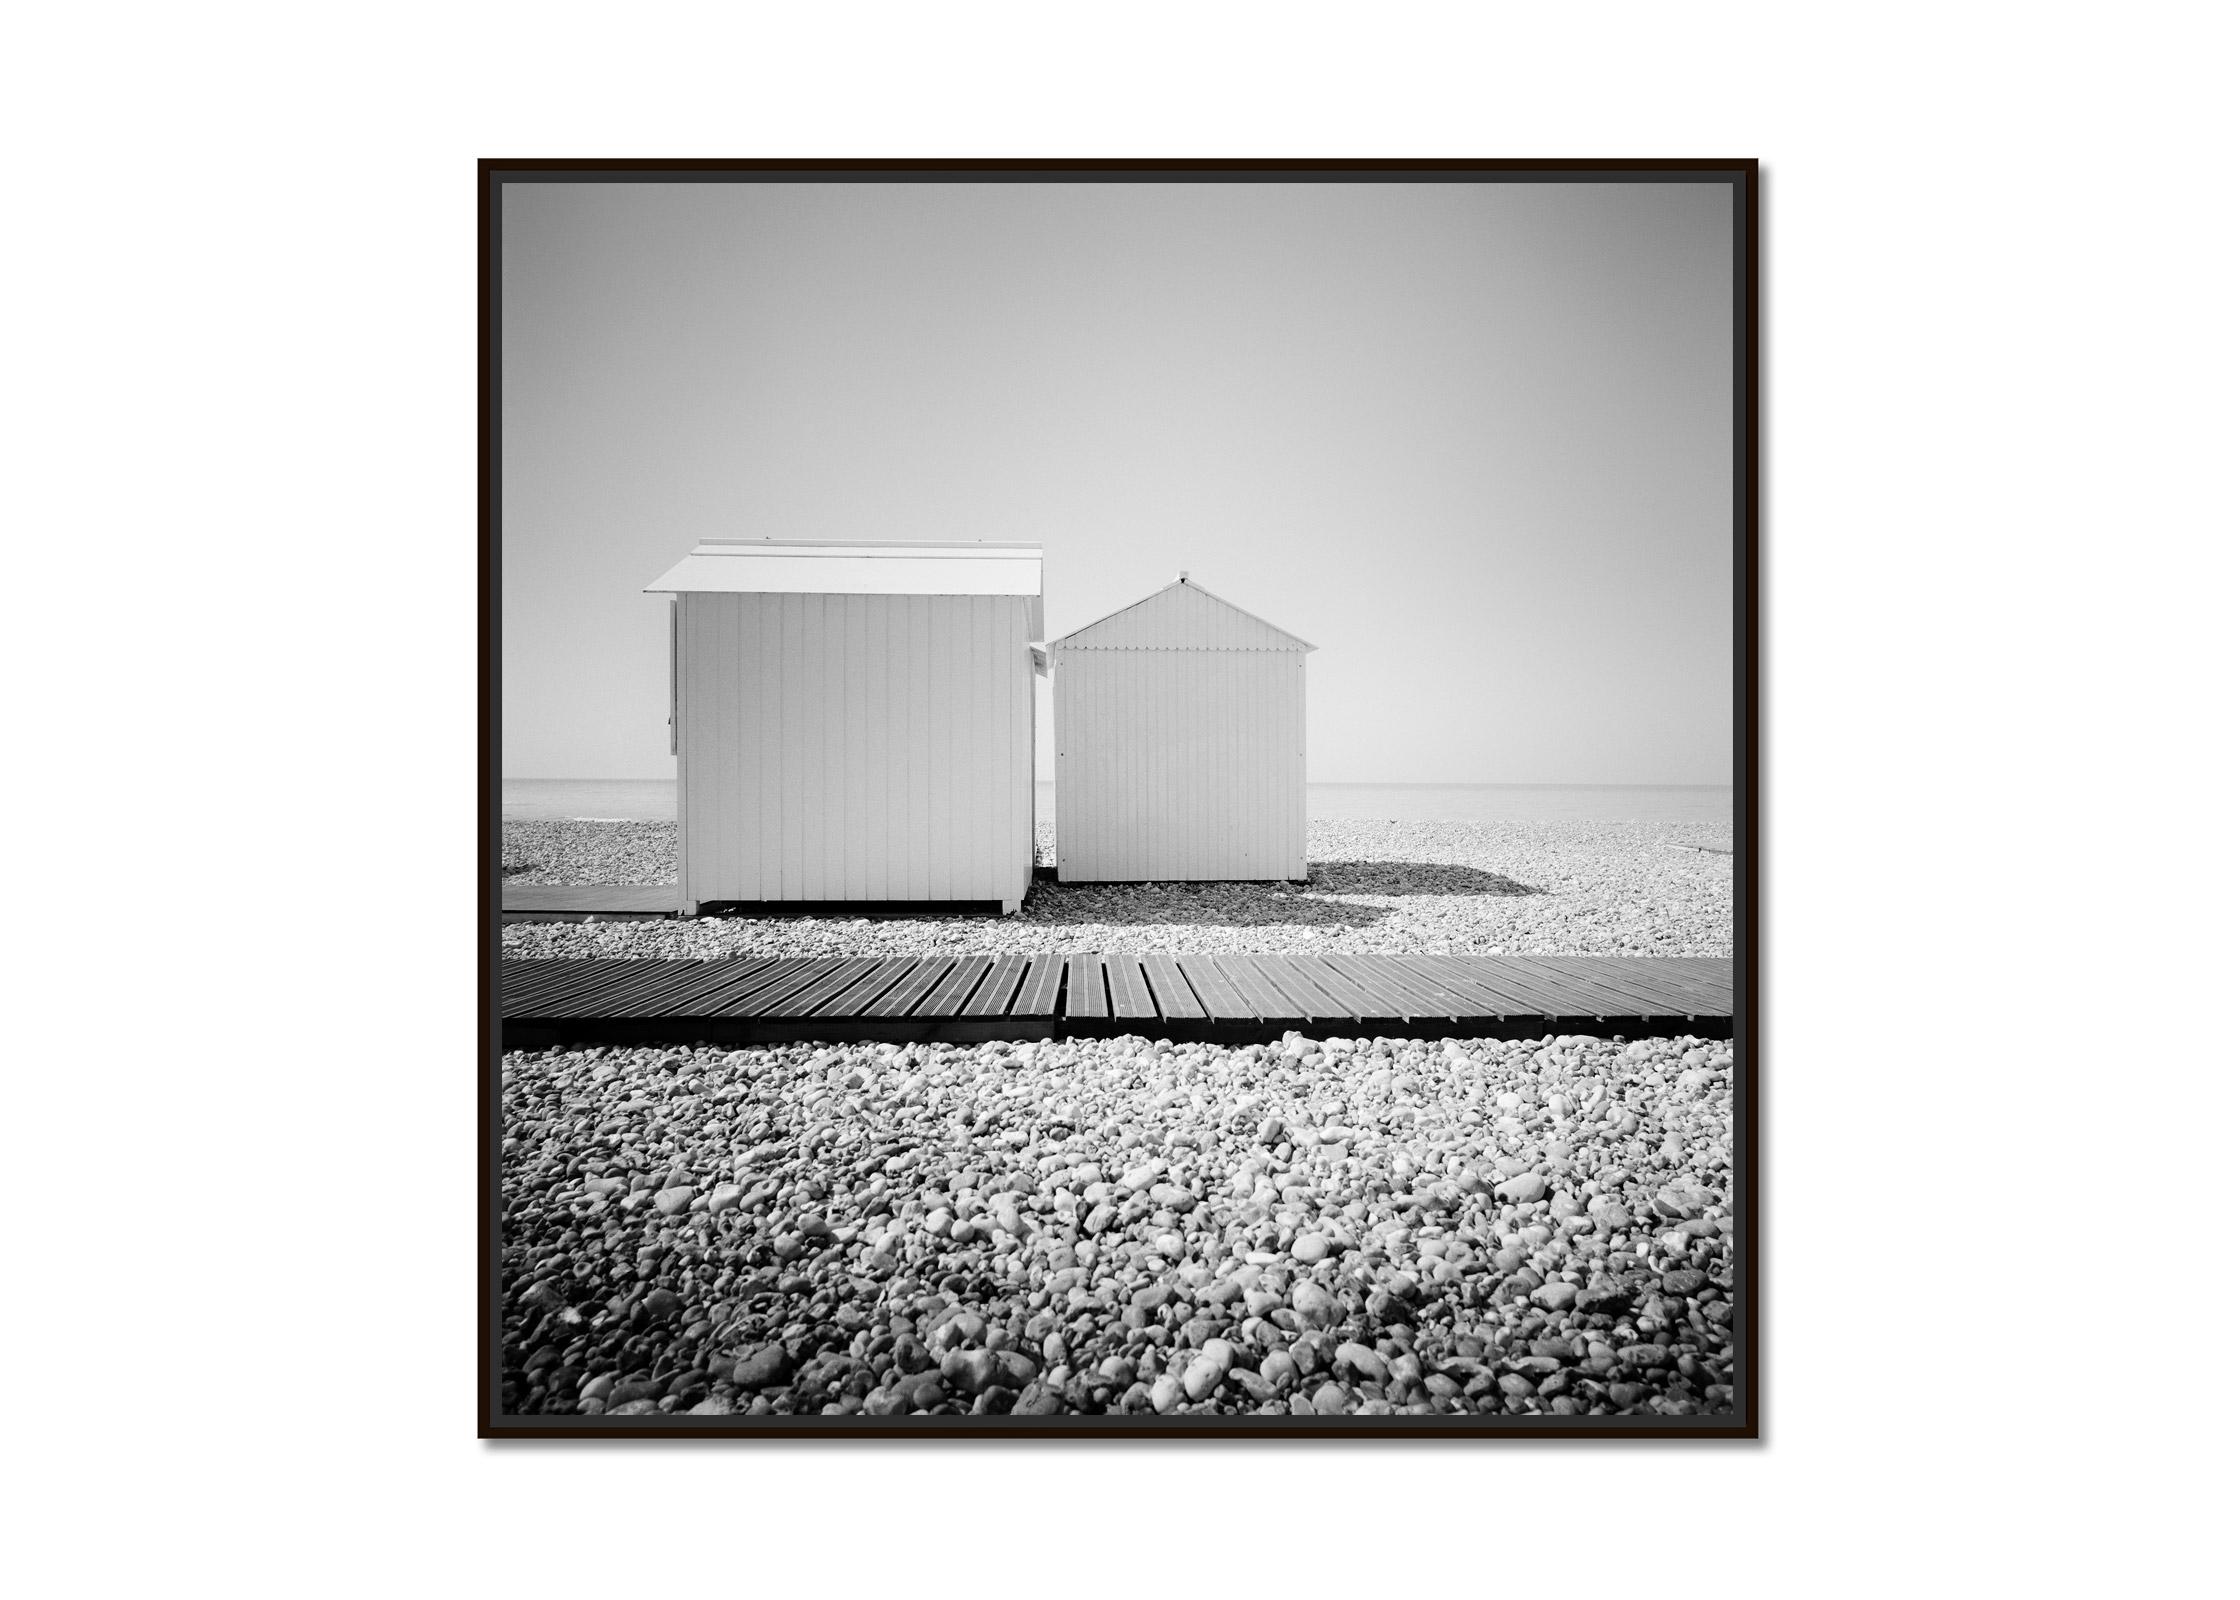 Beach Huts, Promenade, France, black and white photography, fine art landscape - Photograph by Gerald Berghammer